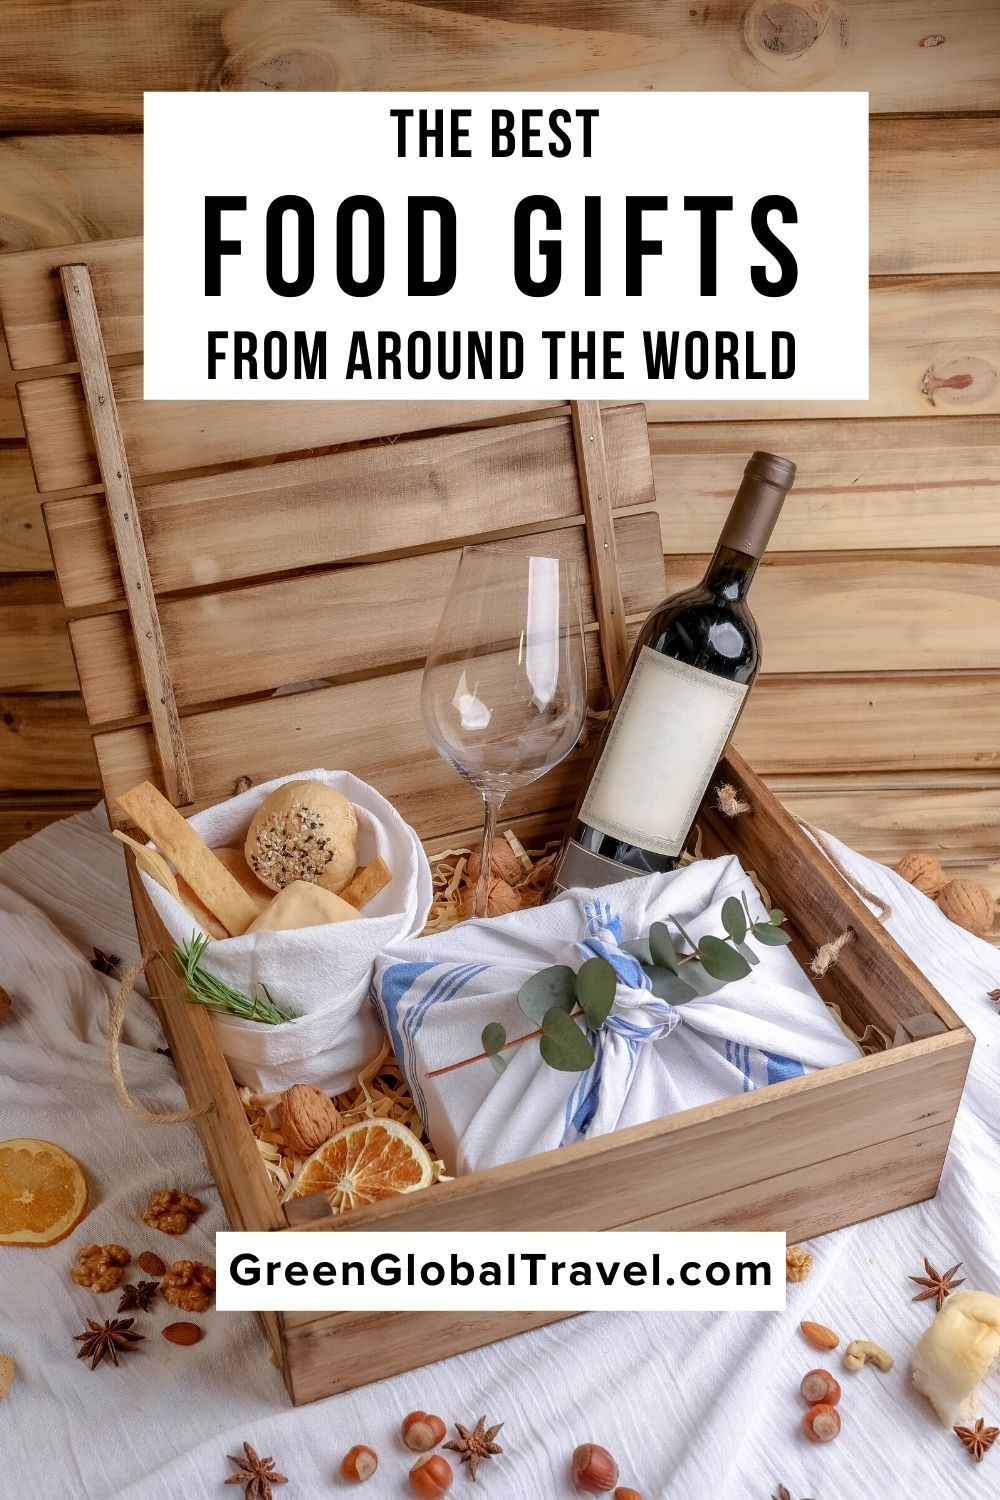 The Best Food Gifts From Around the World (The Ultimate Gourmet Guide) includes Baked Goods Gift Baskets, Chocolate Gift Boxes, Coffee Gift Sets, Tea Gift Sets,Prepared Food Gifts, Vegetarian/Vegan Food Gifts, Meat Gifts and more! | food gifts for men| best foodie gifts| food presents| foodie gifts for christmas |monthly food subscription boxes |gourmet foodie gifts | foodie gifts| foodie gift basket |gifts for foodies| snack gift box |foodie subscriptions| best gifts for foodies